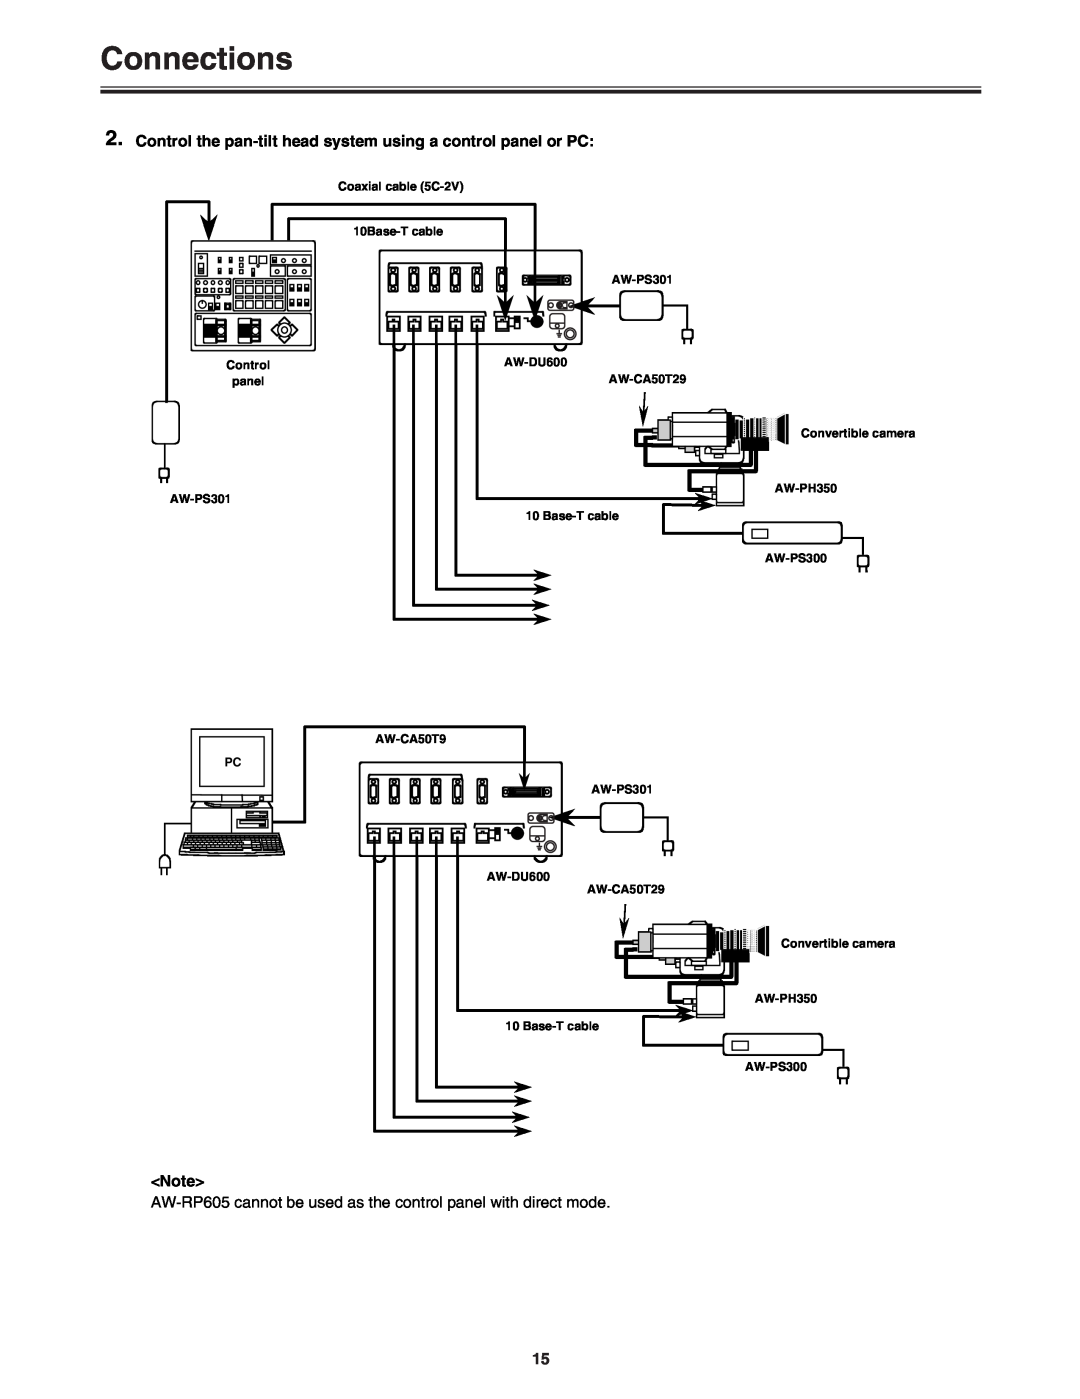 Panasonic AW-DU600 manual Connections, Control the pan-tilt head system using a control panel or PC 